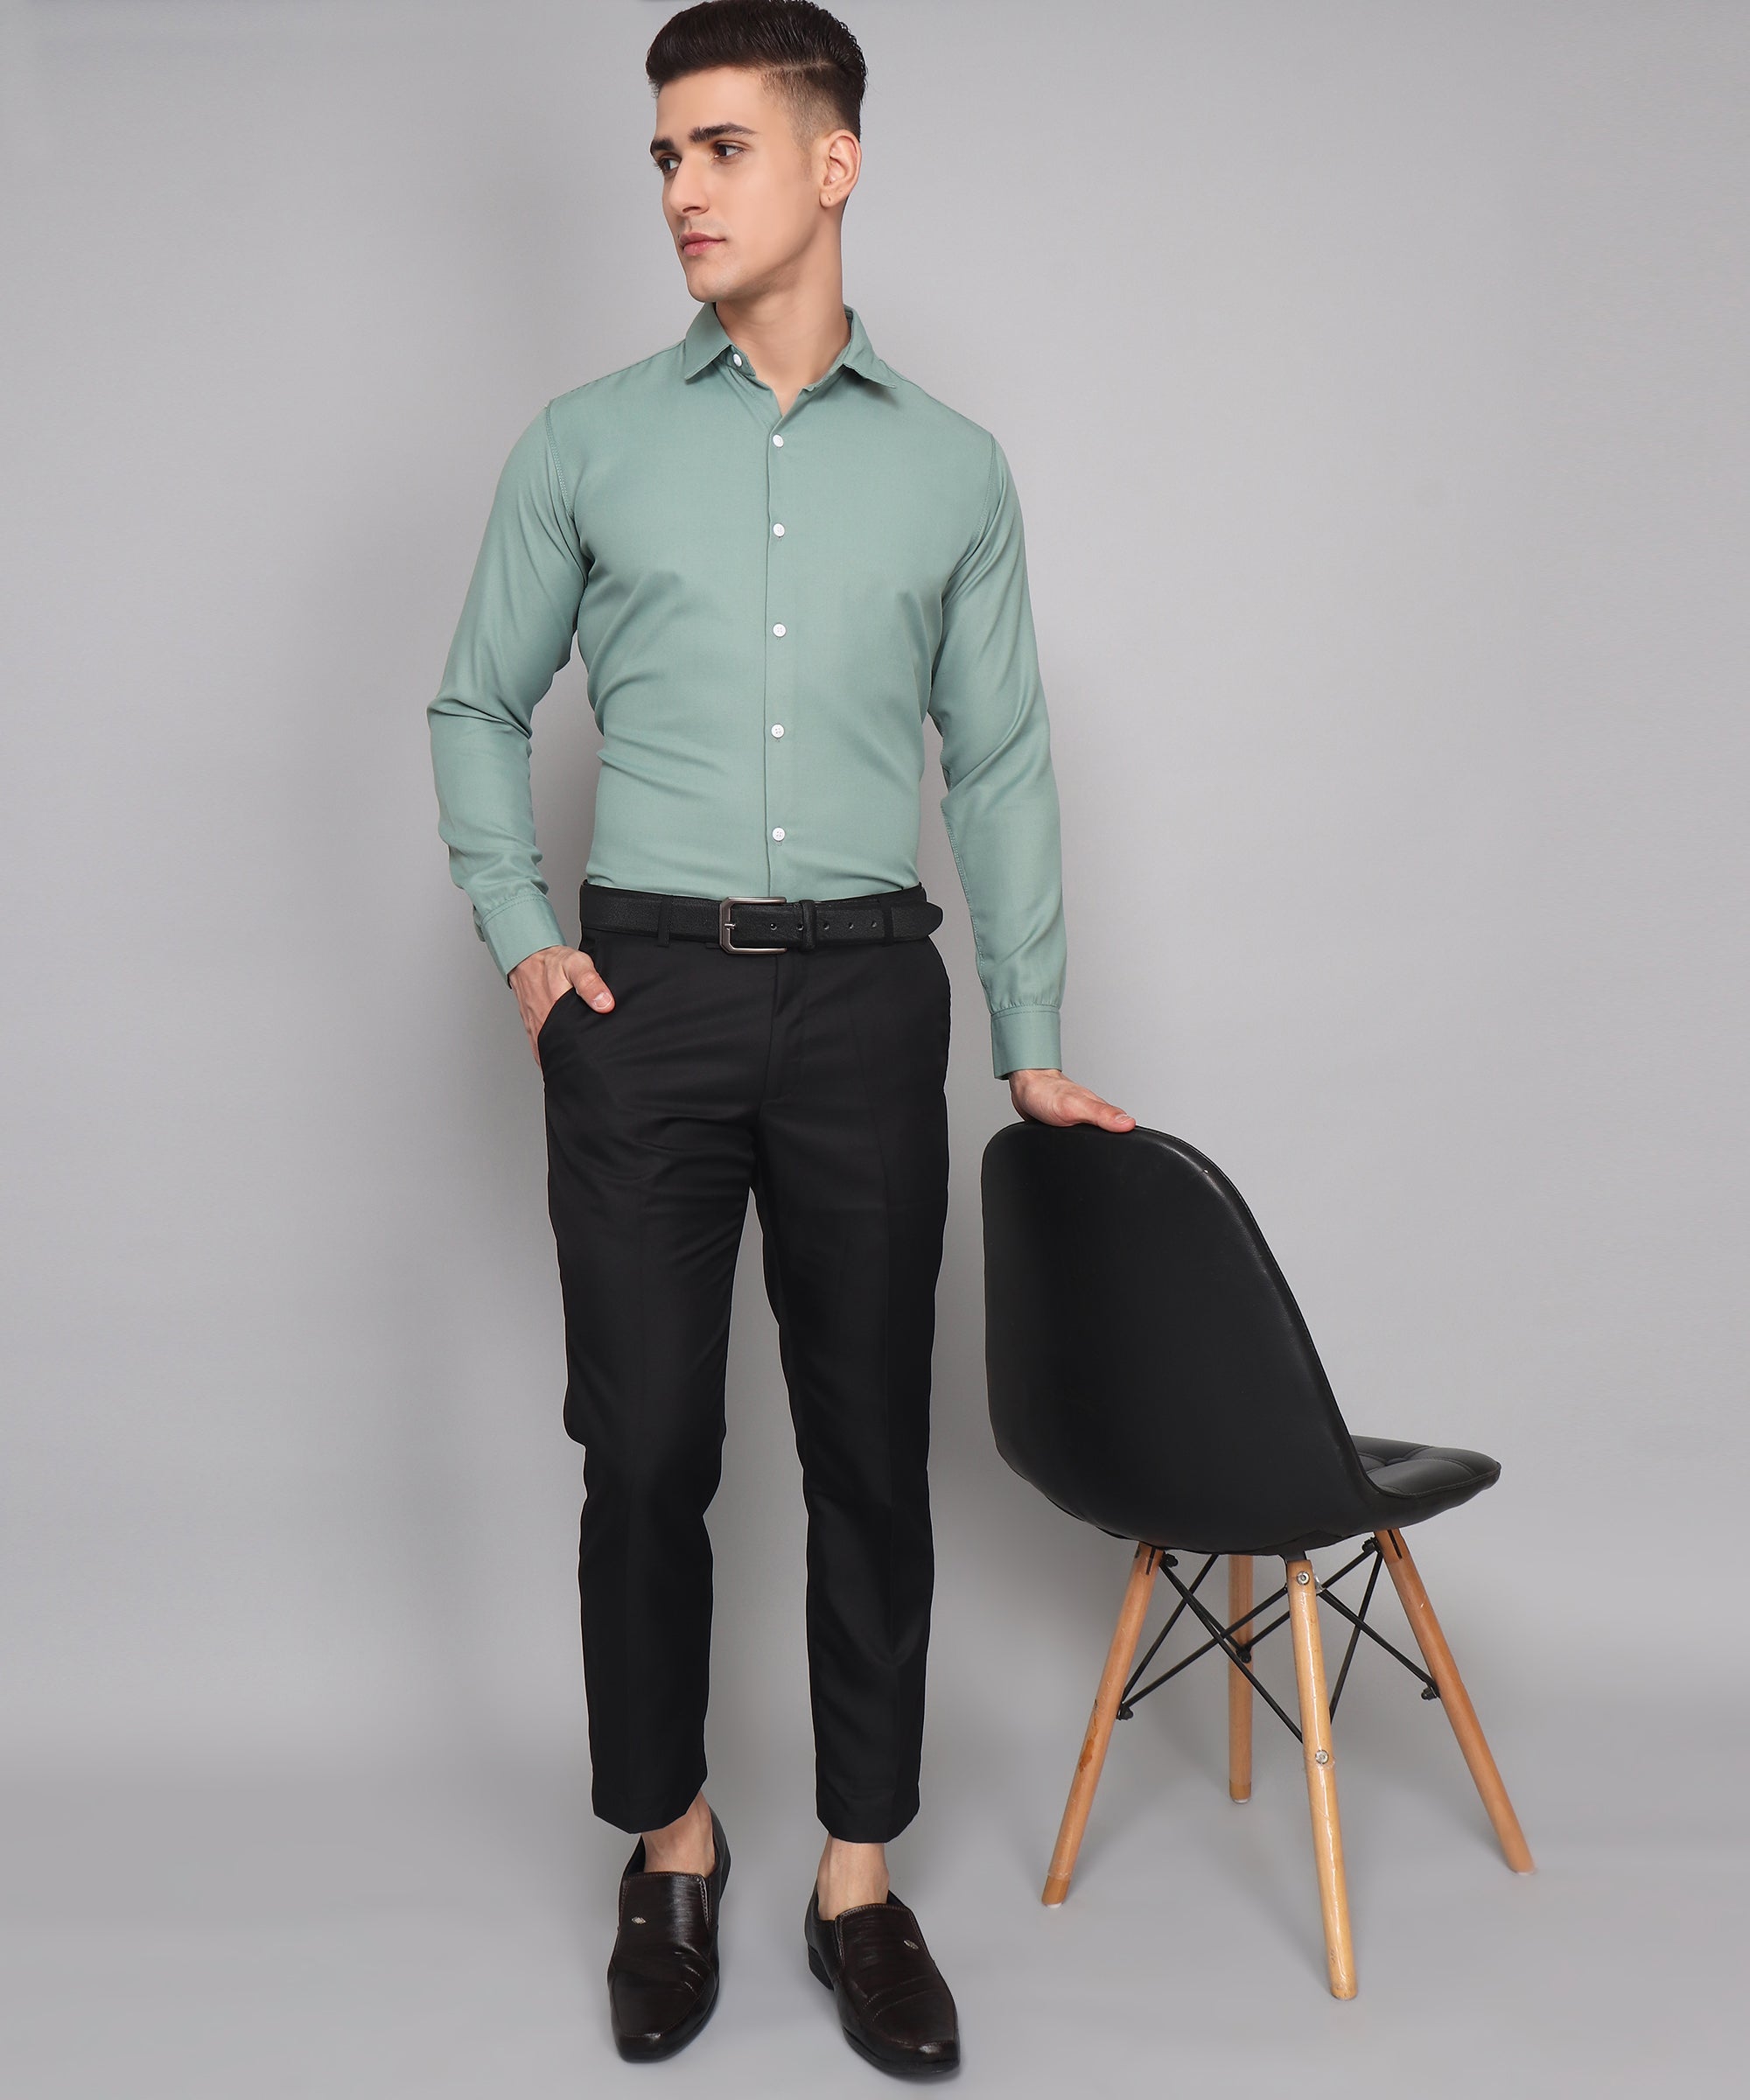 How to Find the Perfect Button-Down Shirt?